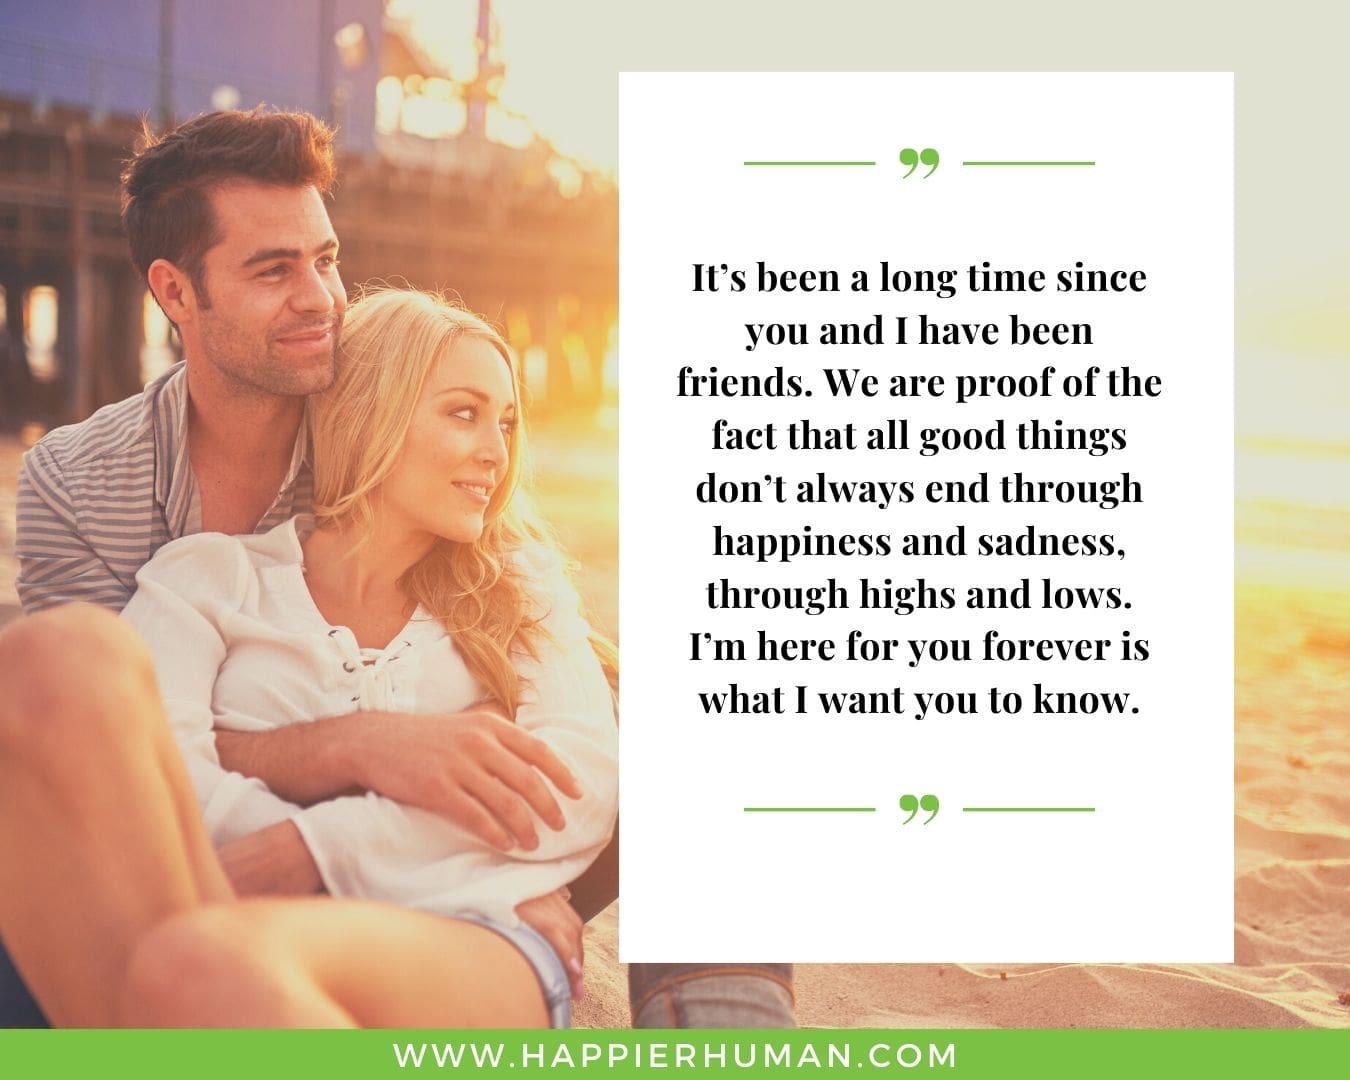 I’m Here for You Quotes - “It’s been a long time since you and I have been friends. We are proof of the fact that all good things don’t always end through happiness and sadness, through highs and lows. I’m here for you forever is what I want you to know.”